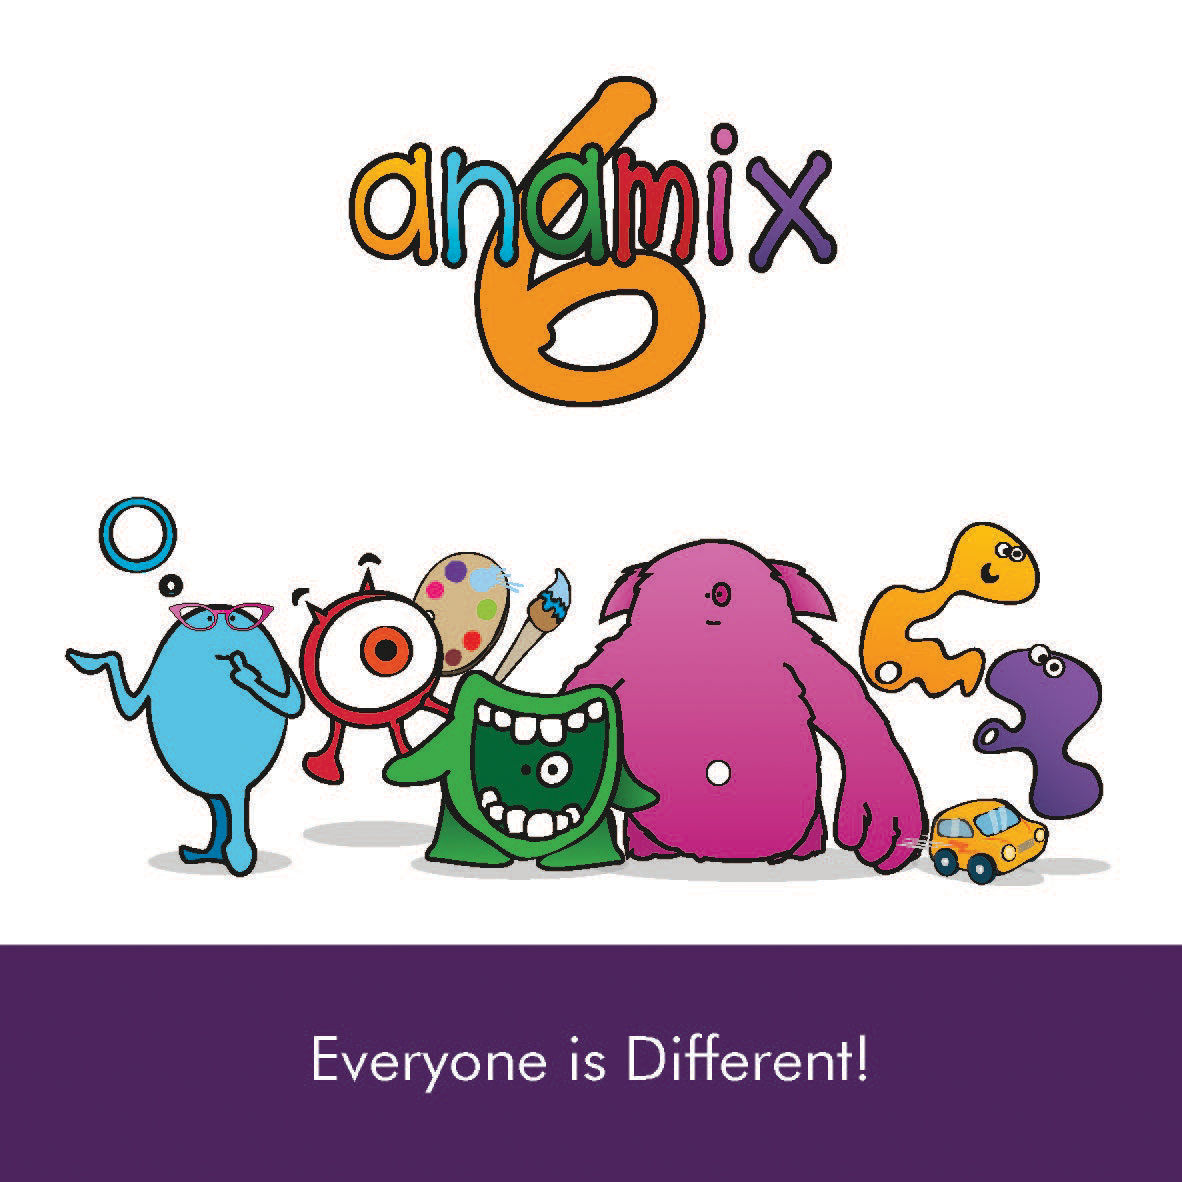 Anamix 6 everyone is different